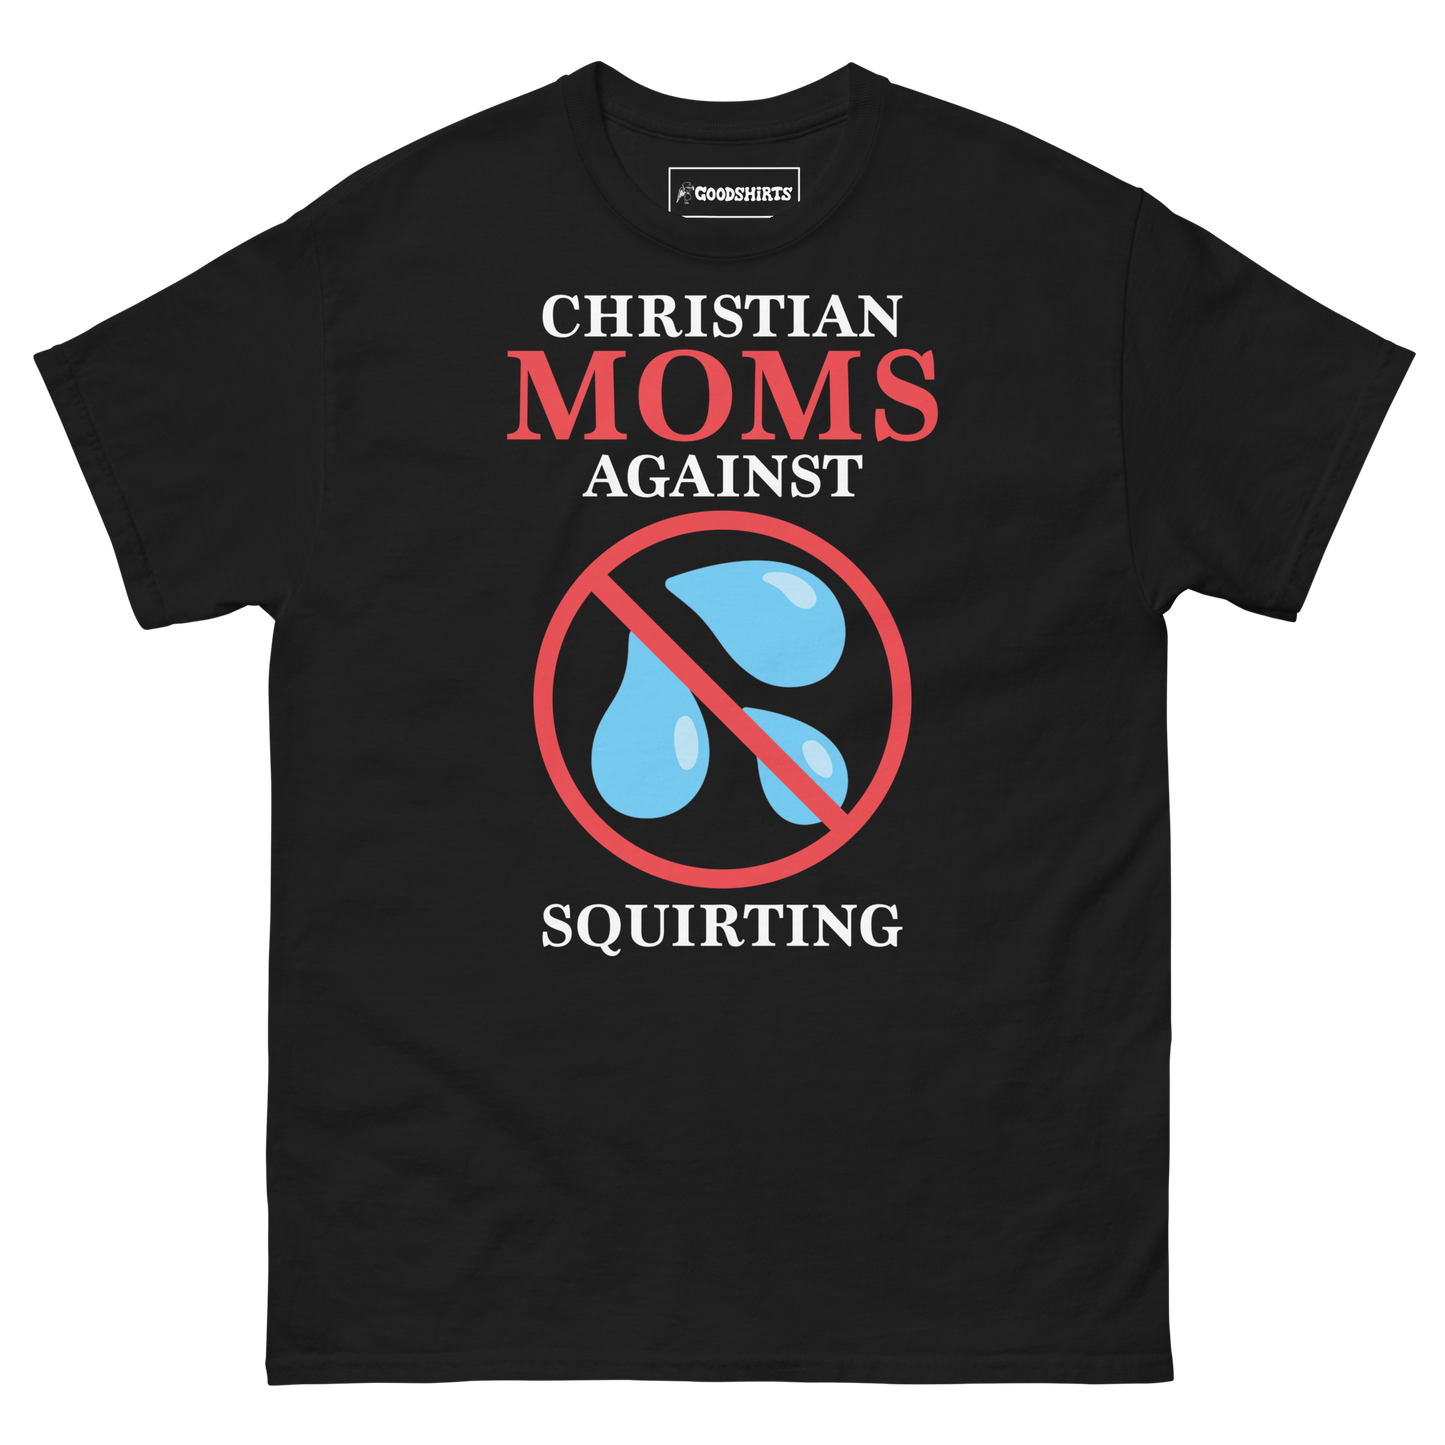 Christian Moms Against Squirting.